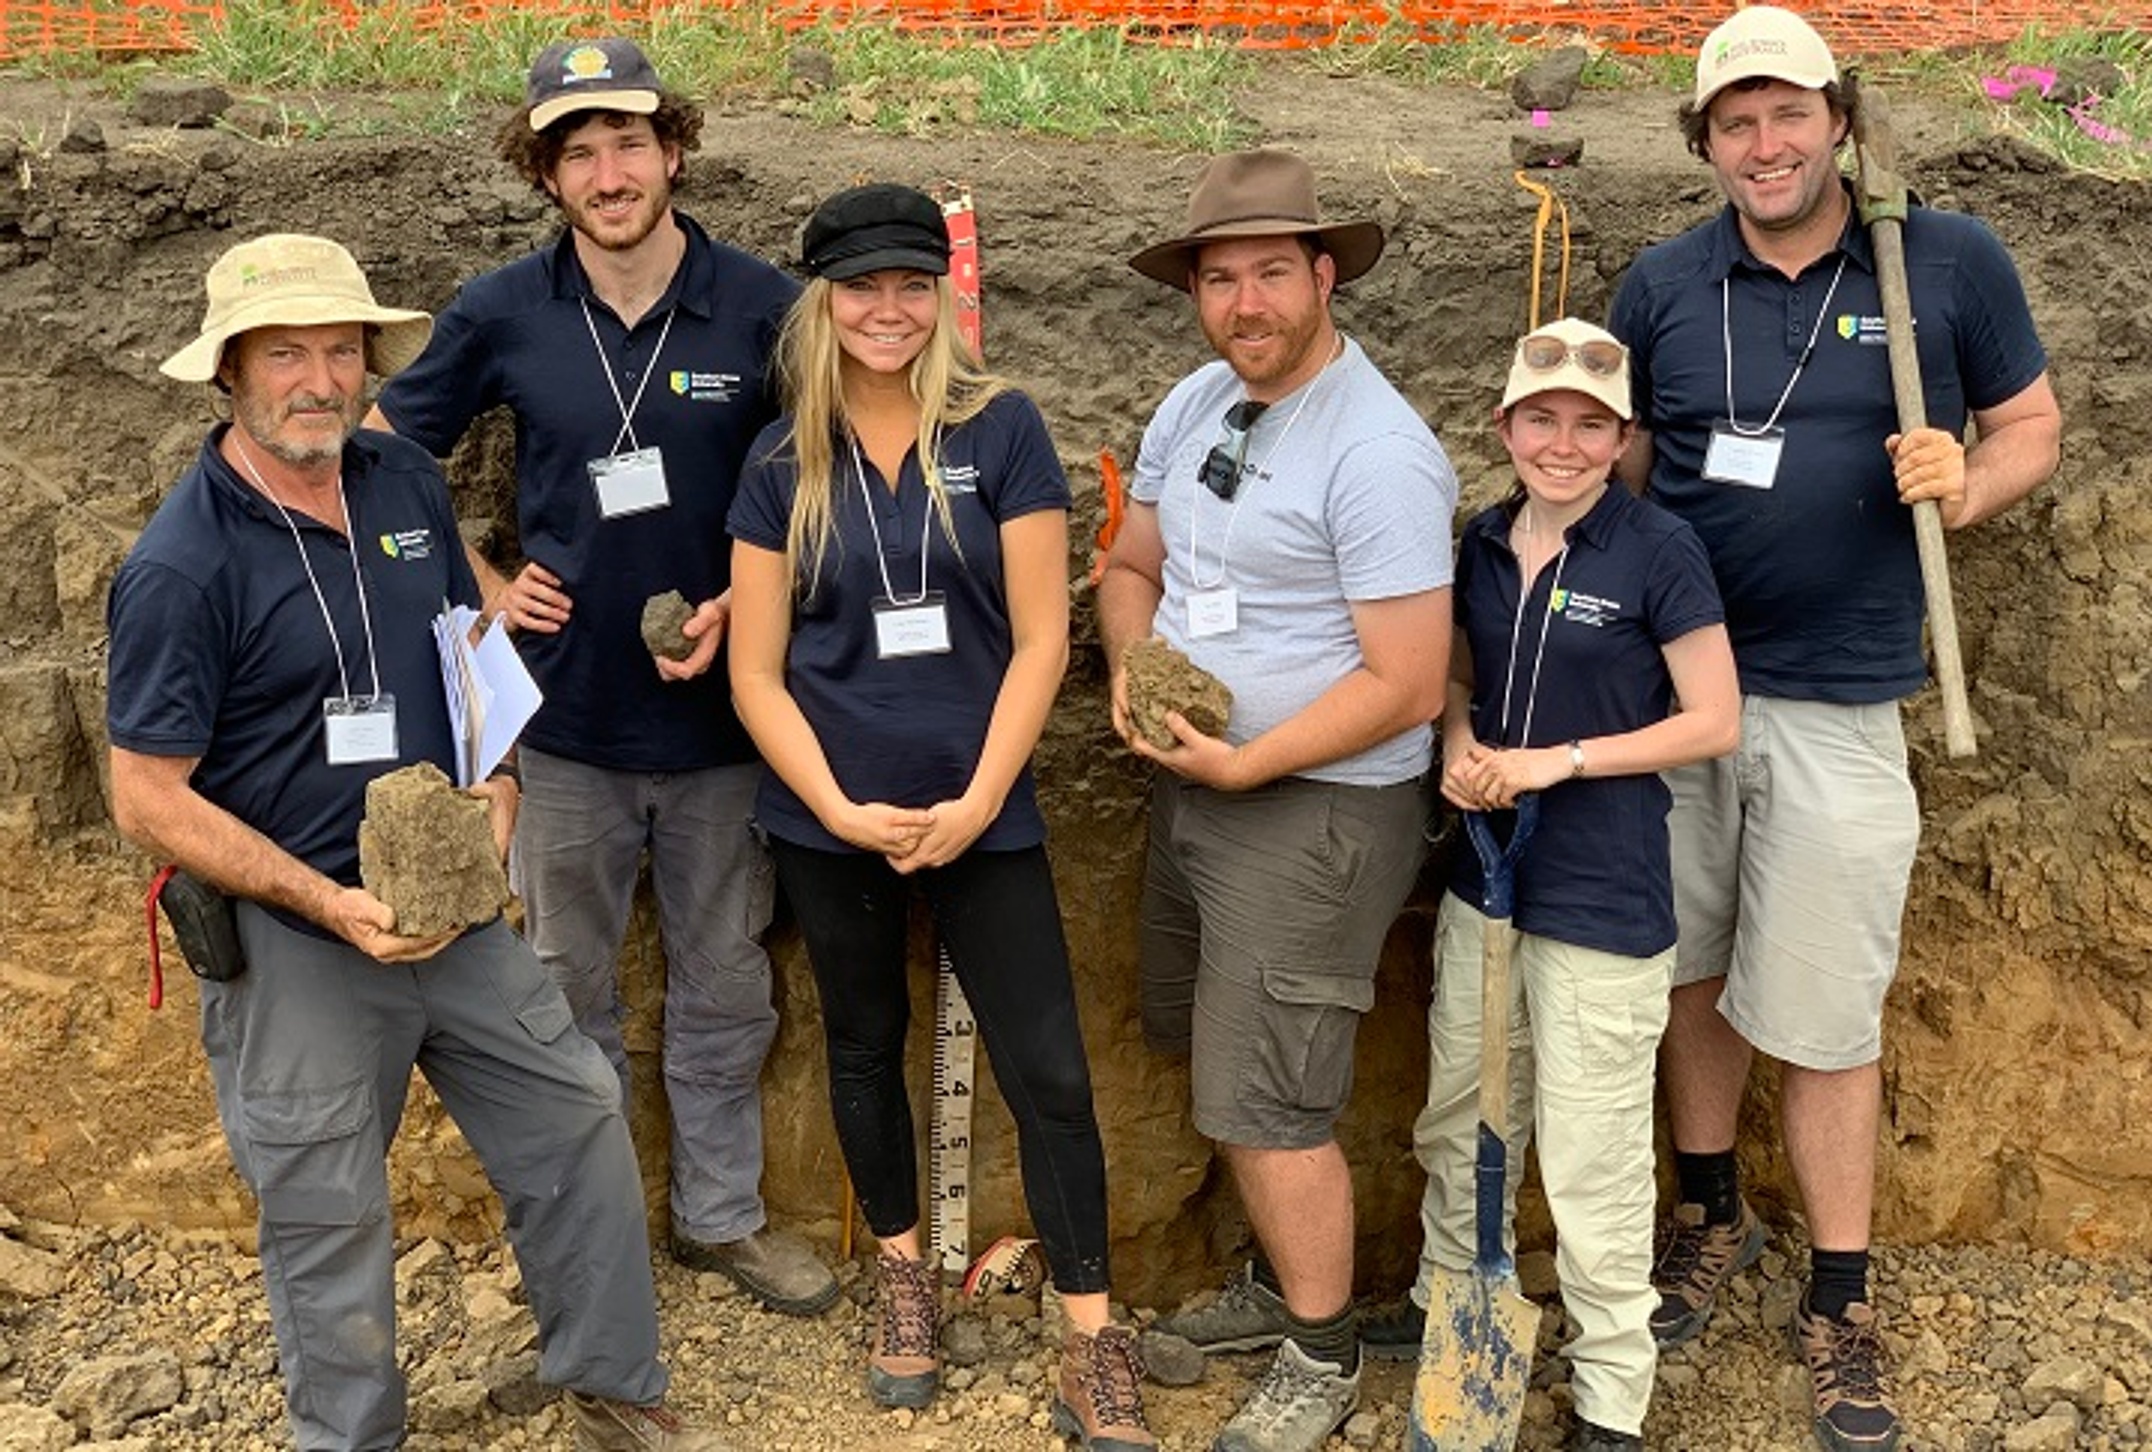 Soil team during the competition. From left Dr John Grant, Luke Danaher, Lisa Henriksen, Tim Field, Christie Magarry and Shannon Waddy.